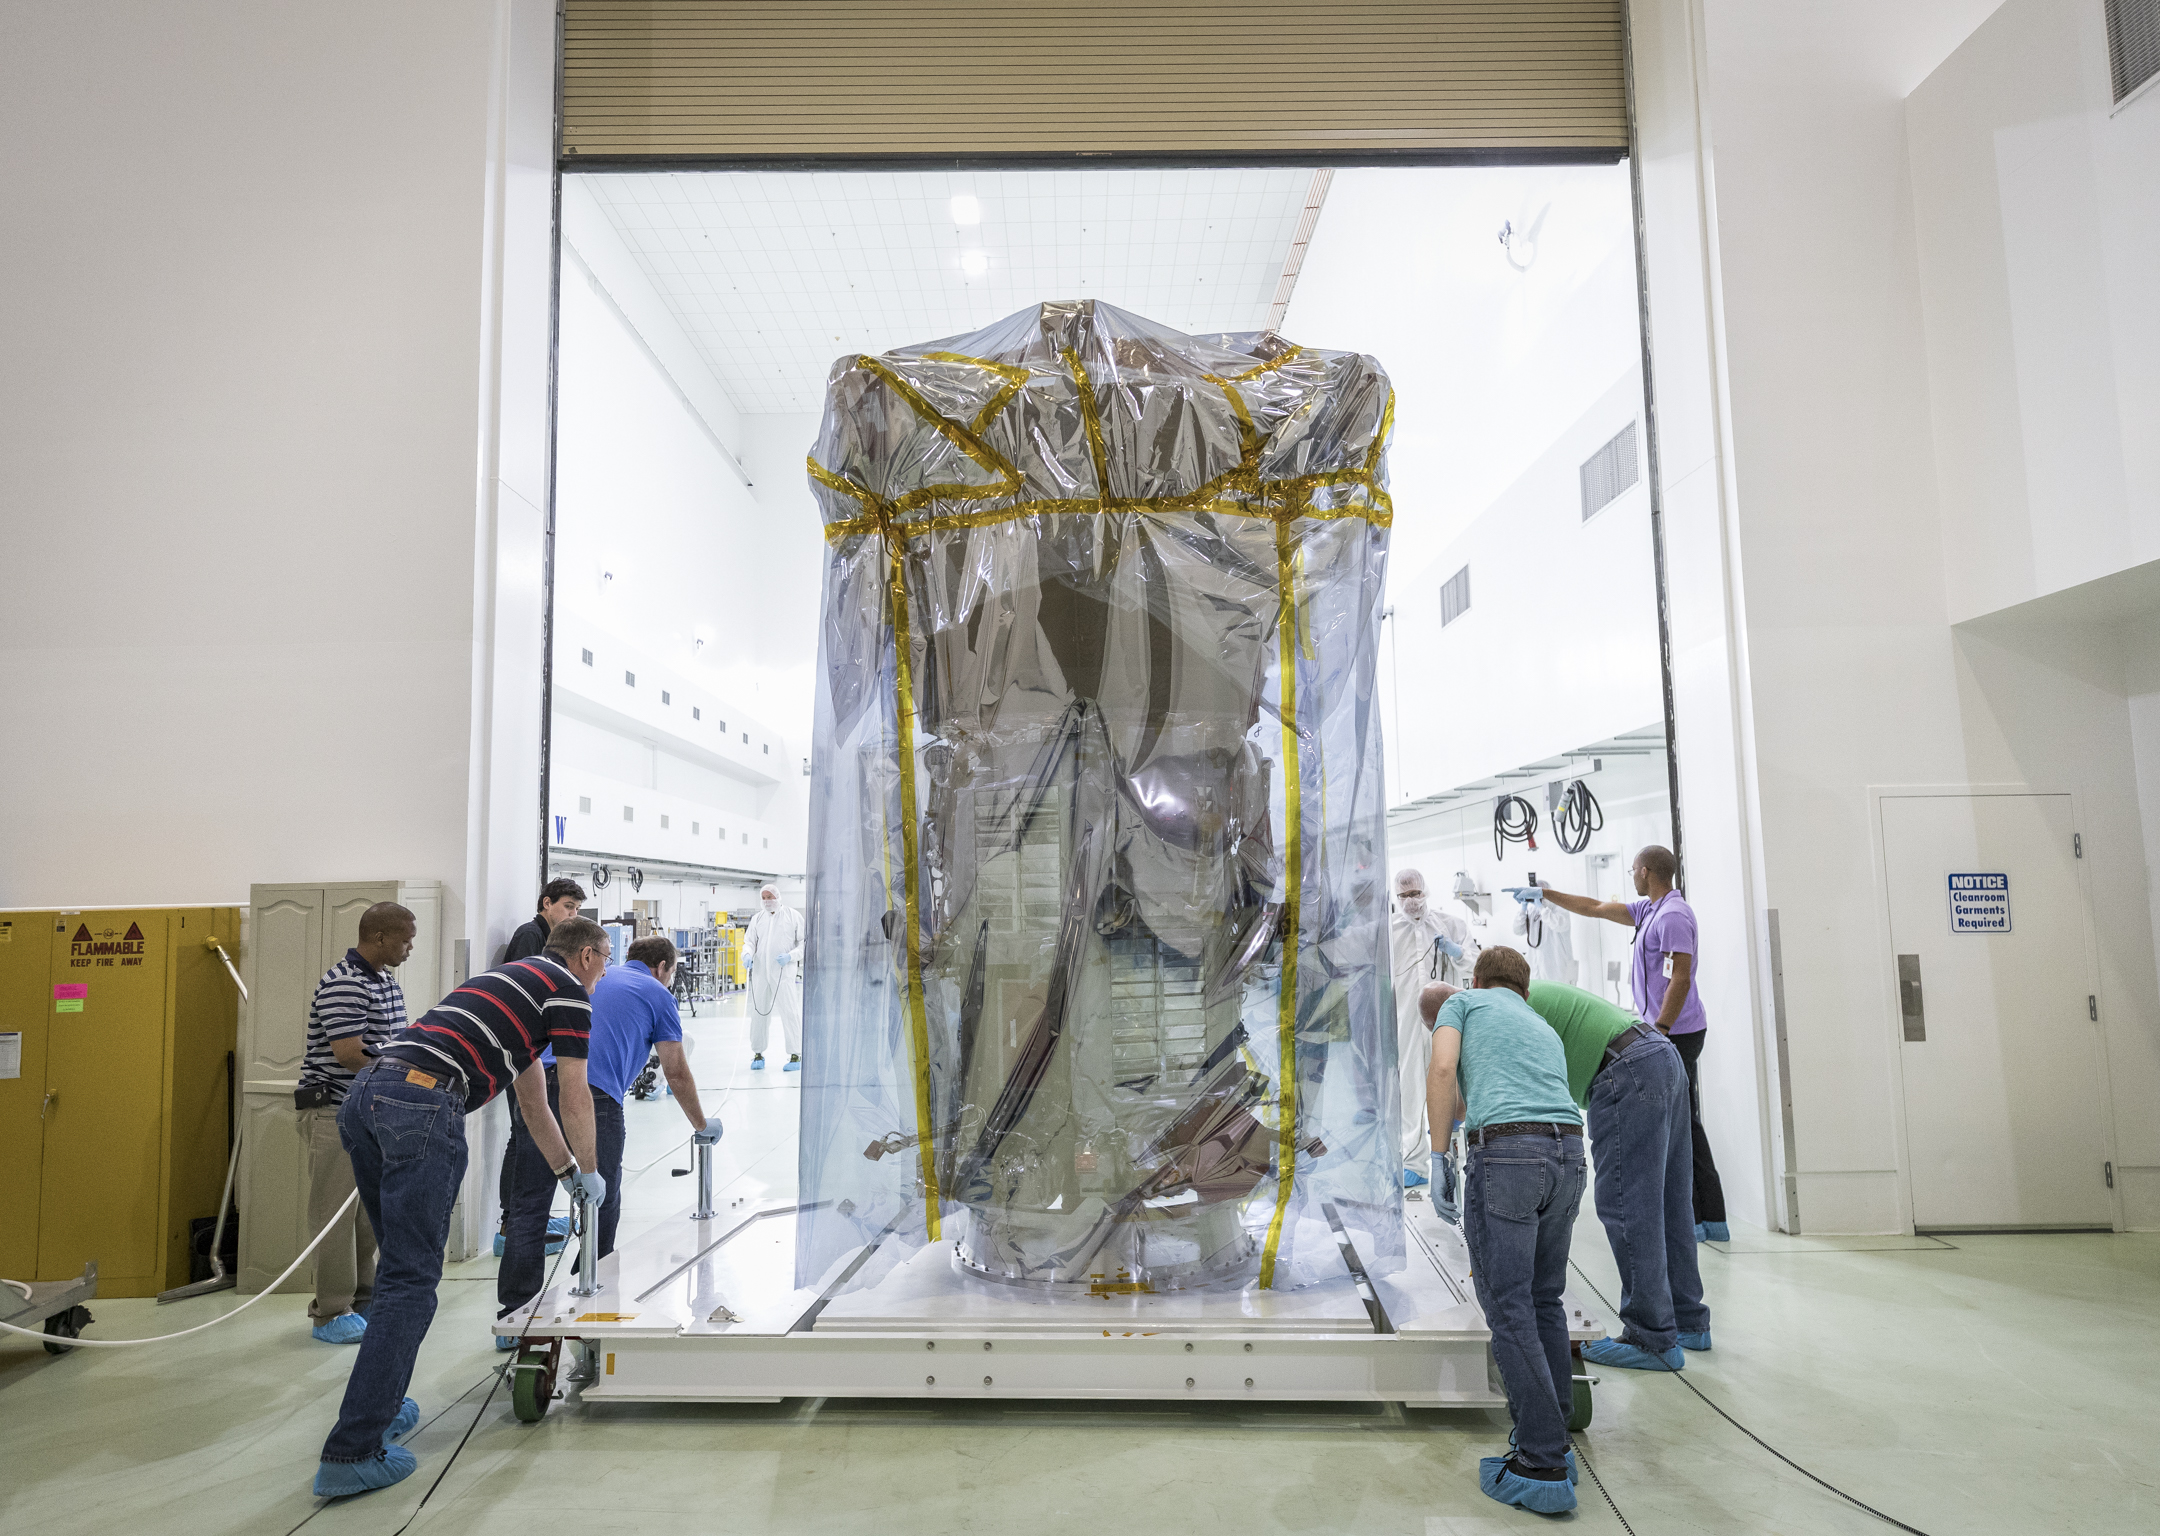 Protected by special plastic sheeting, NASA’s Parker Solar Probe is wheeled into a clean room at Astrotech Space Operations in Titusville, Florida, for pre-launch testing and preparations. On April 3, 2018, the spacecraft was transported from NASA’s Goddard Space Flight Center in Greenbelt, Maryland, to Joint Base Andrews by truck, then by a United States Air Force C-17 to Titusville. 